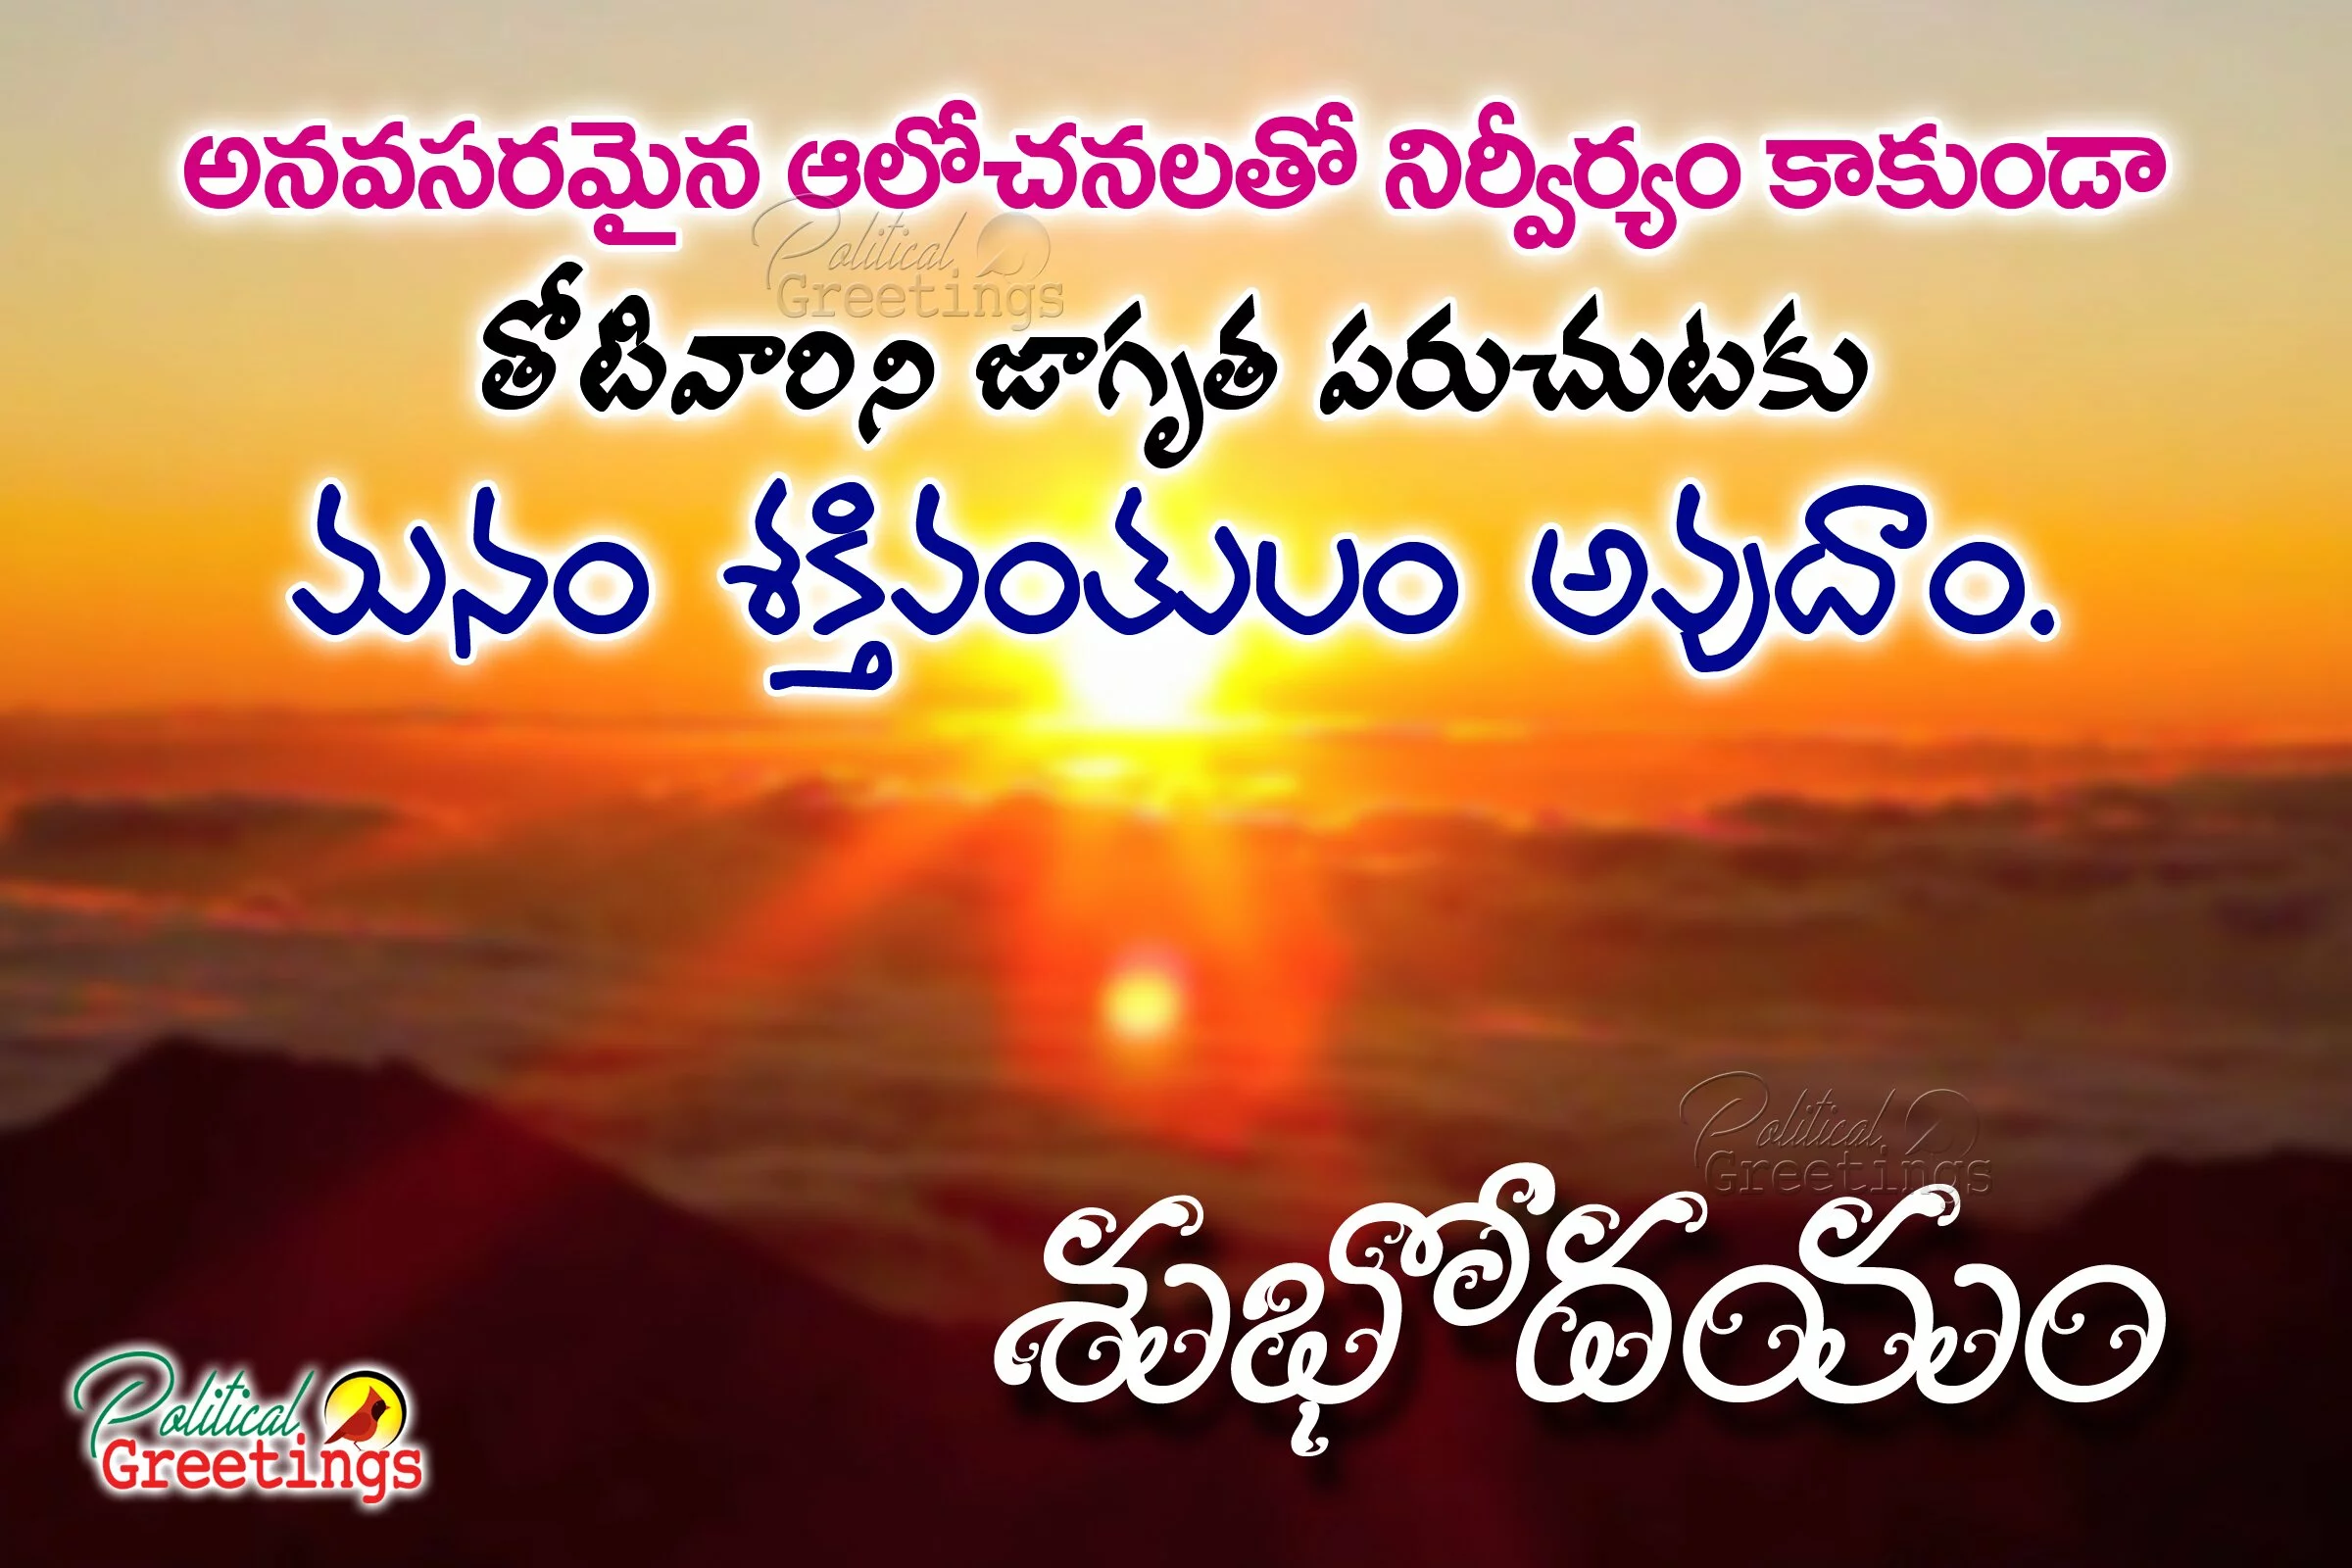 telugu-good-morning-quotes-wishes-greetings-pictures-wallpapers1